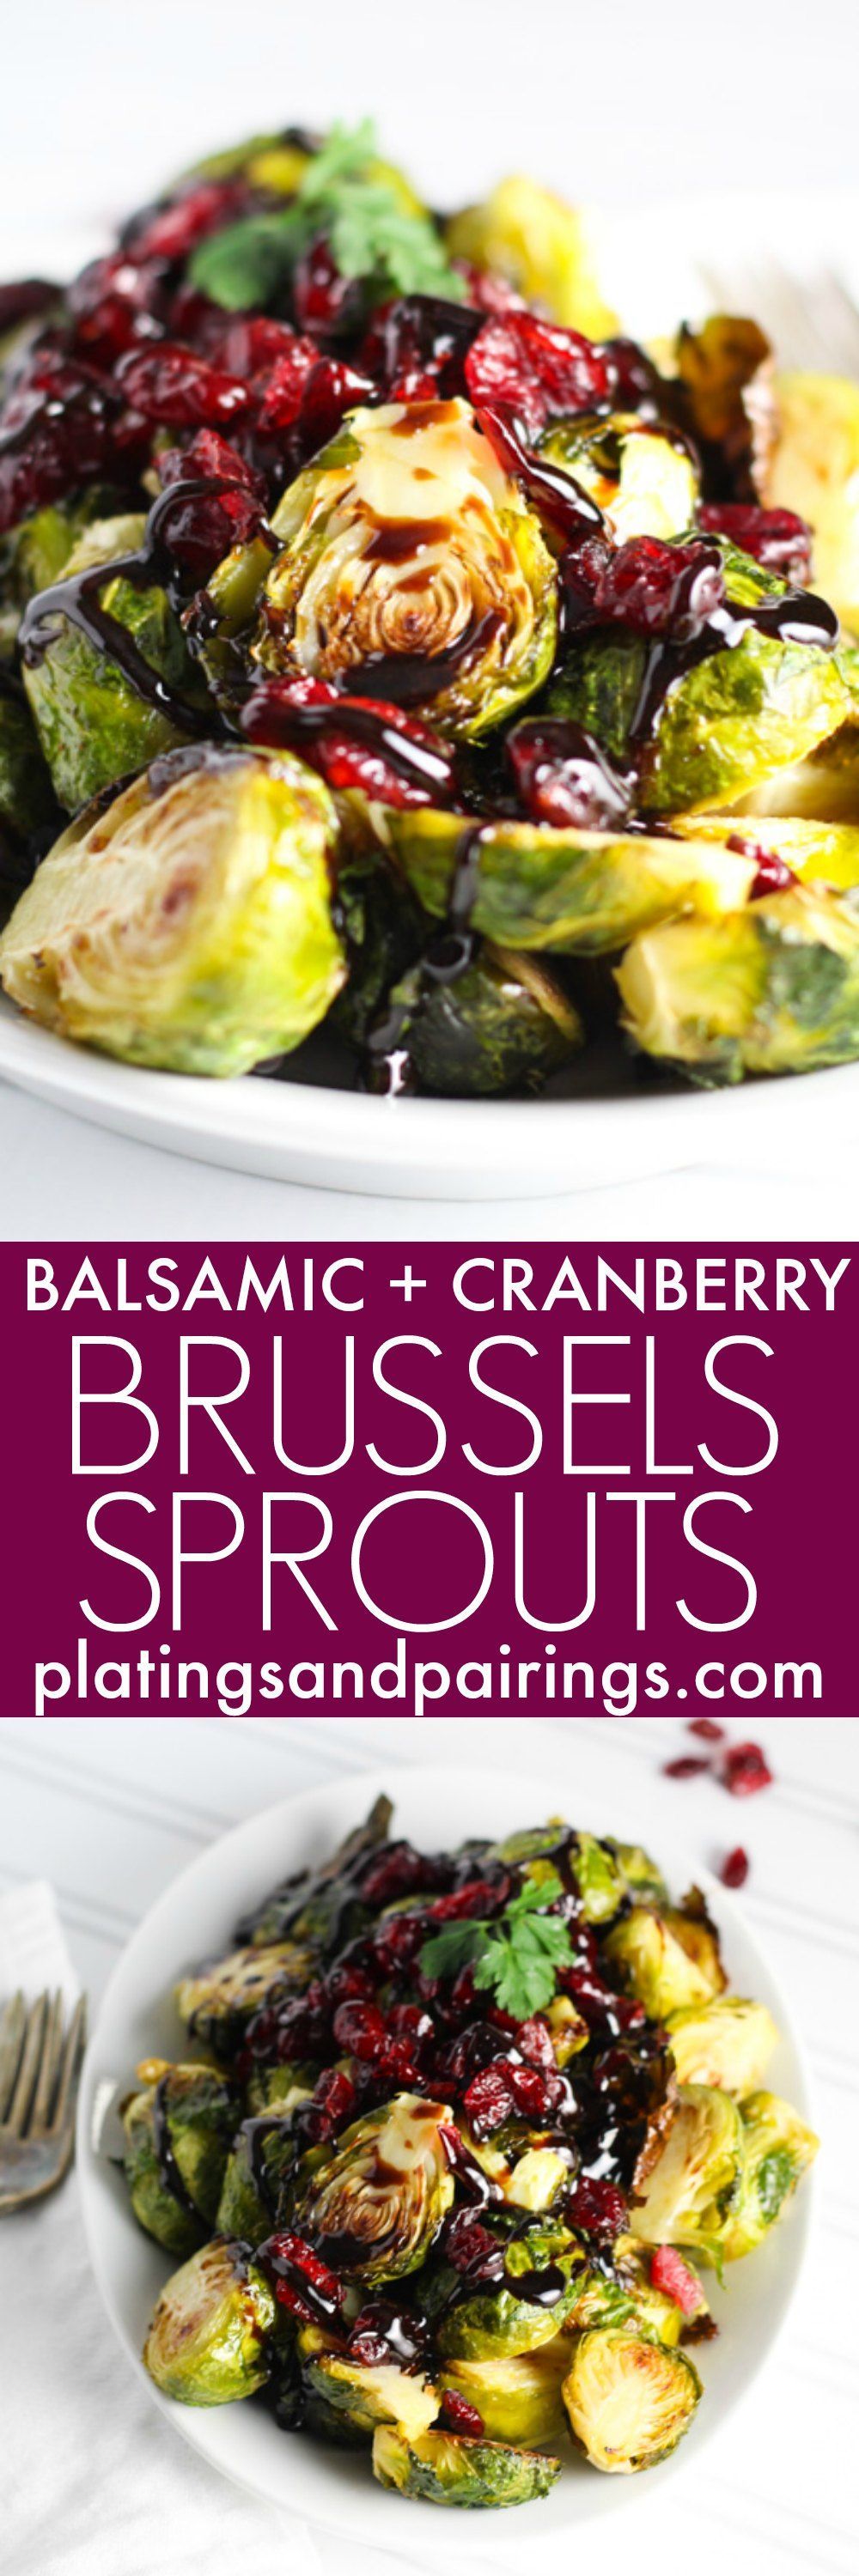 These Roasted Brussels Sprouts with Cranberries and Balsamic Reduction make a simp